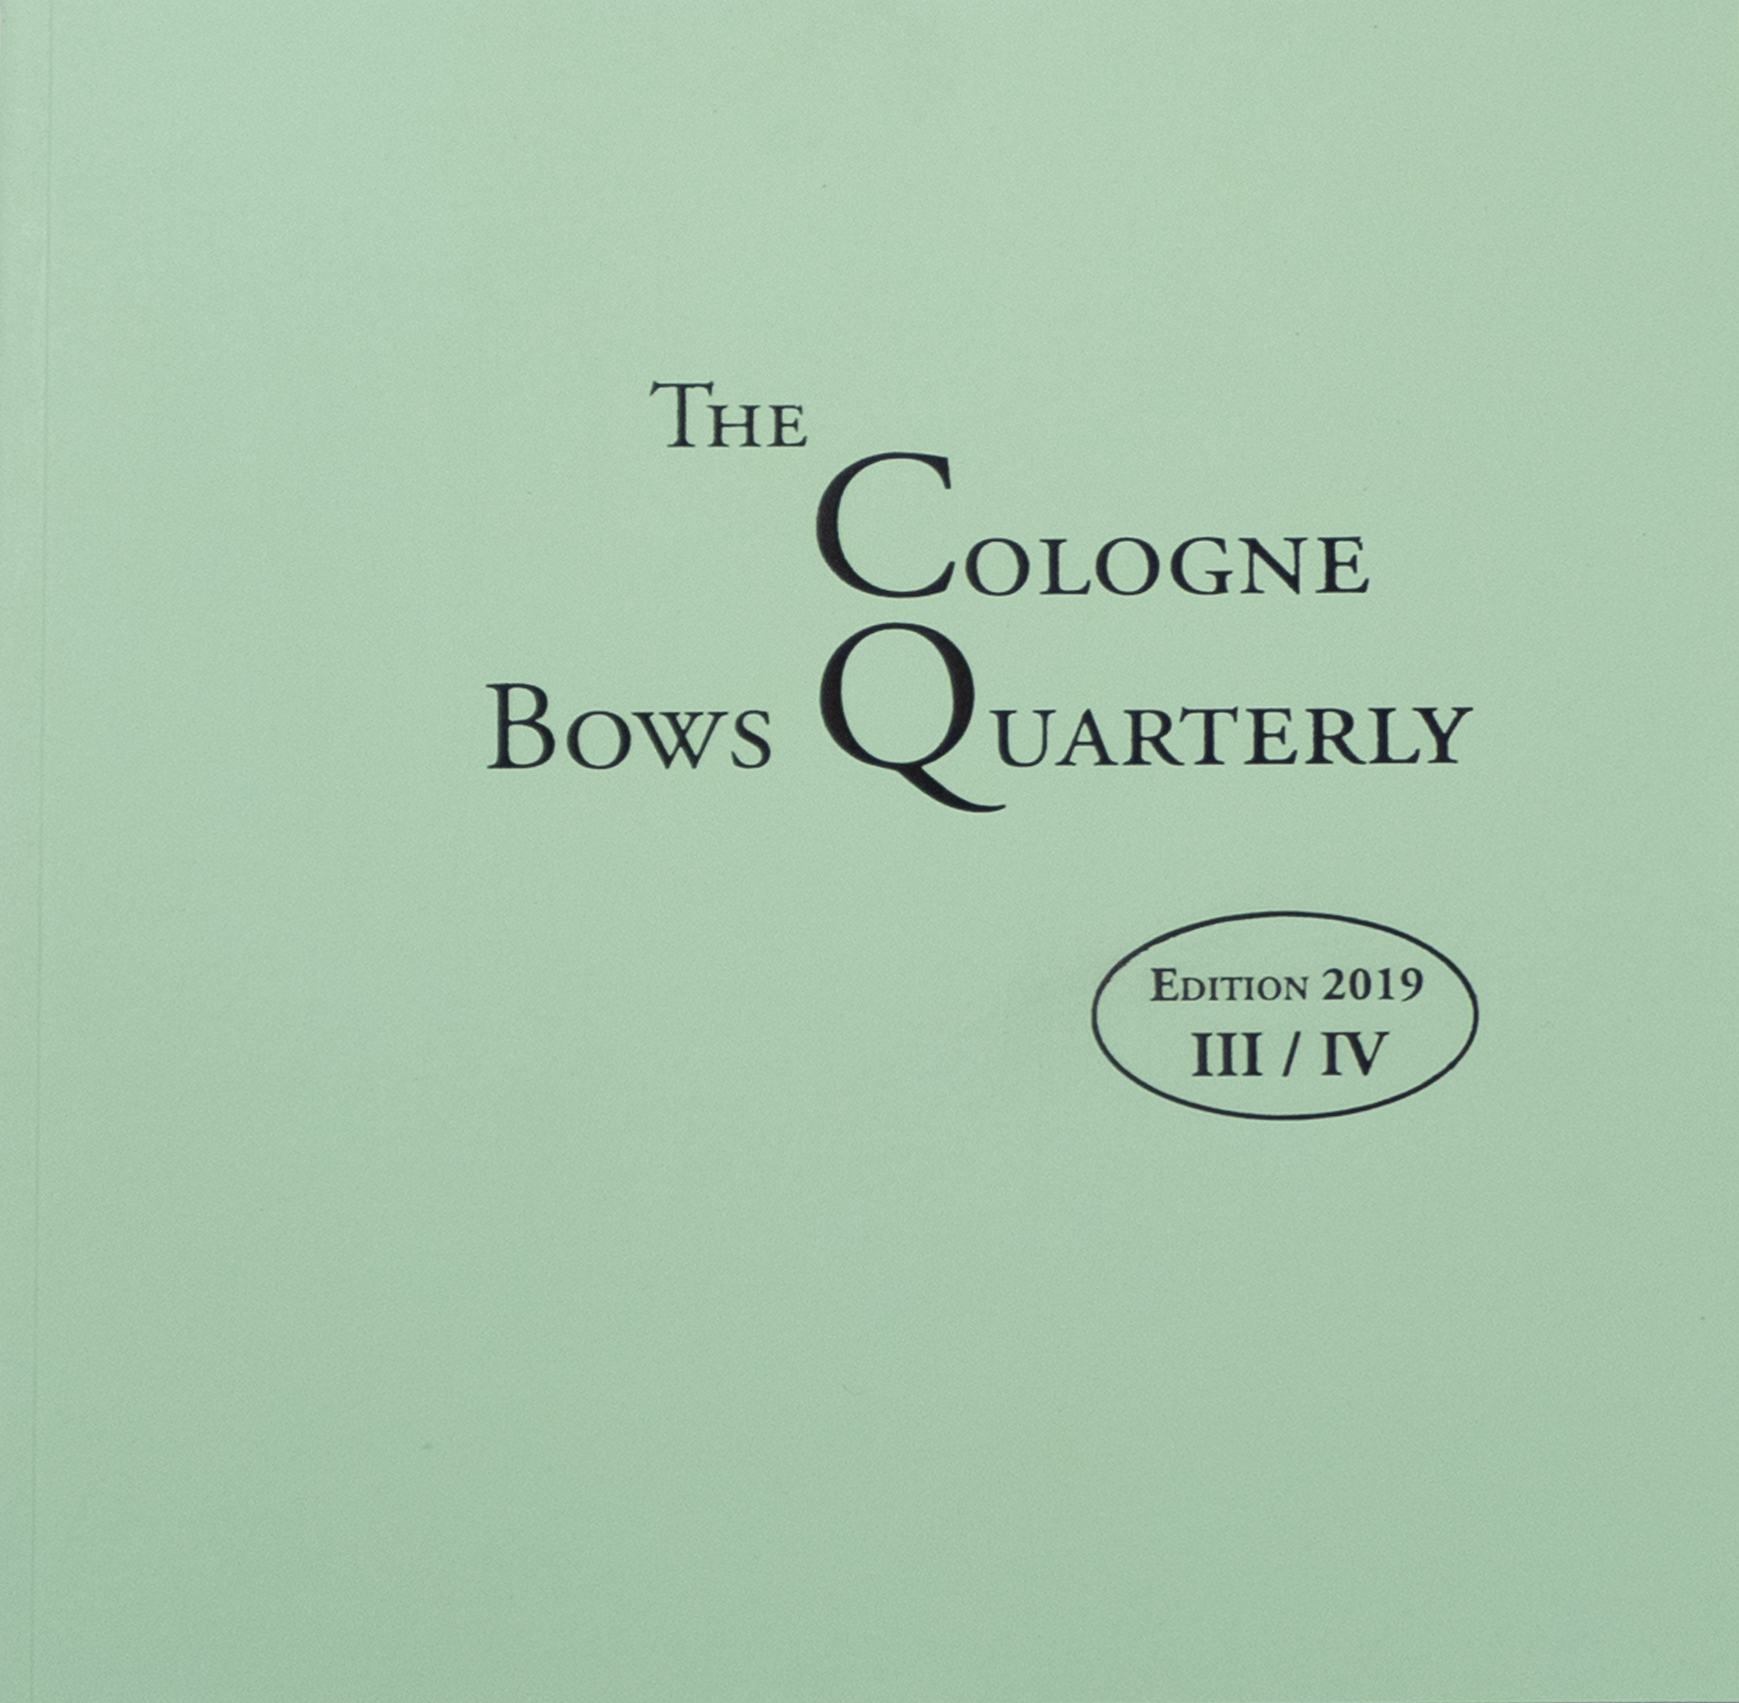 The Cologne Bows Quarterly - Edition 2019 III / IV